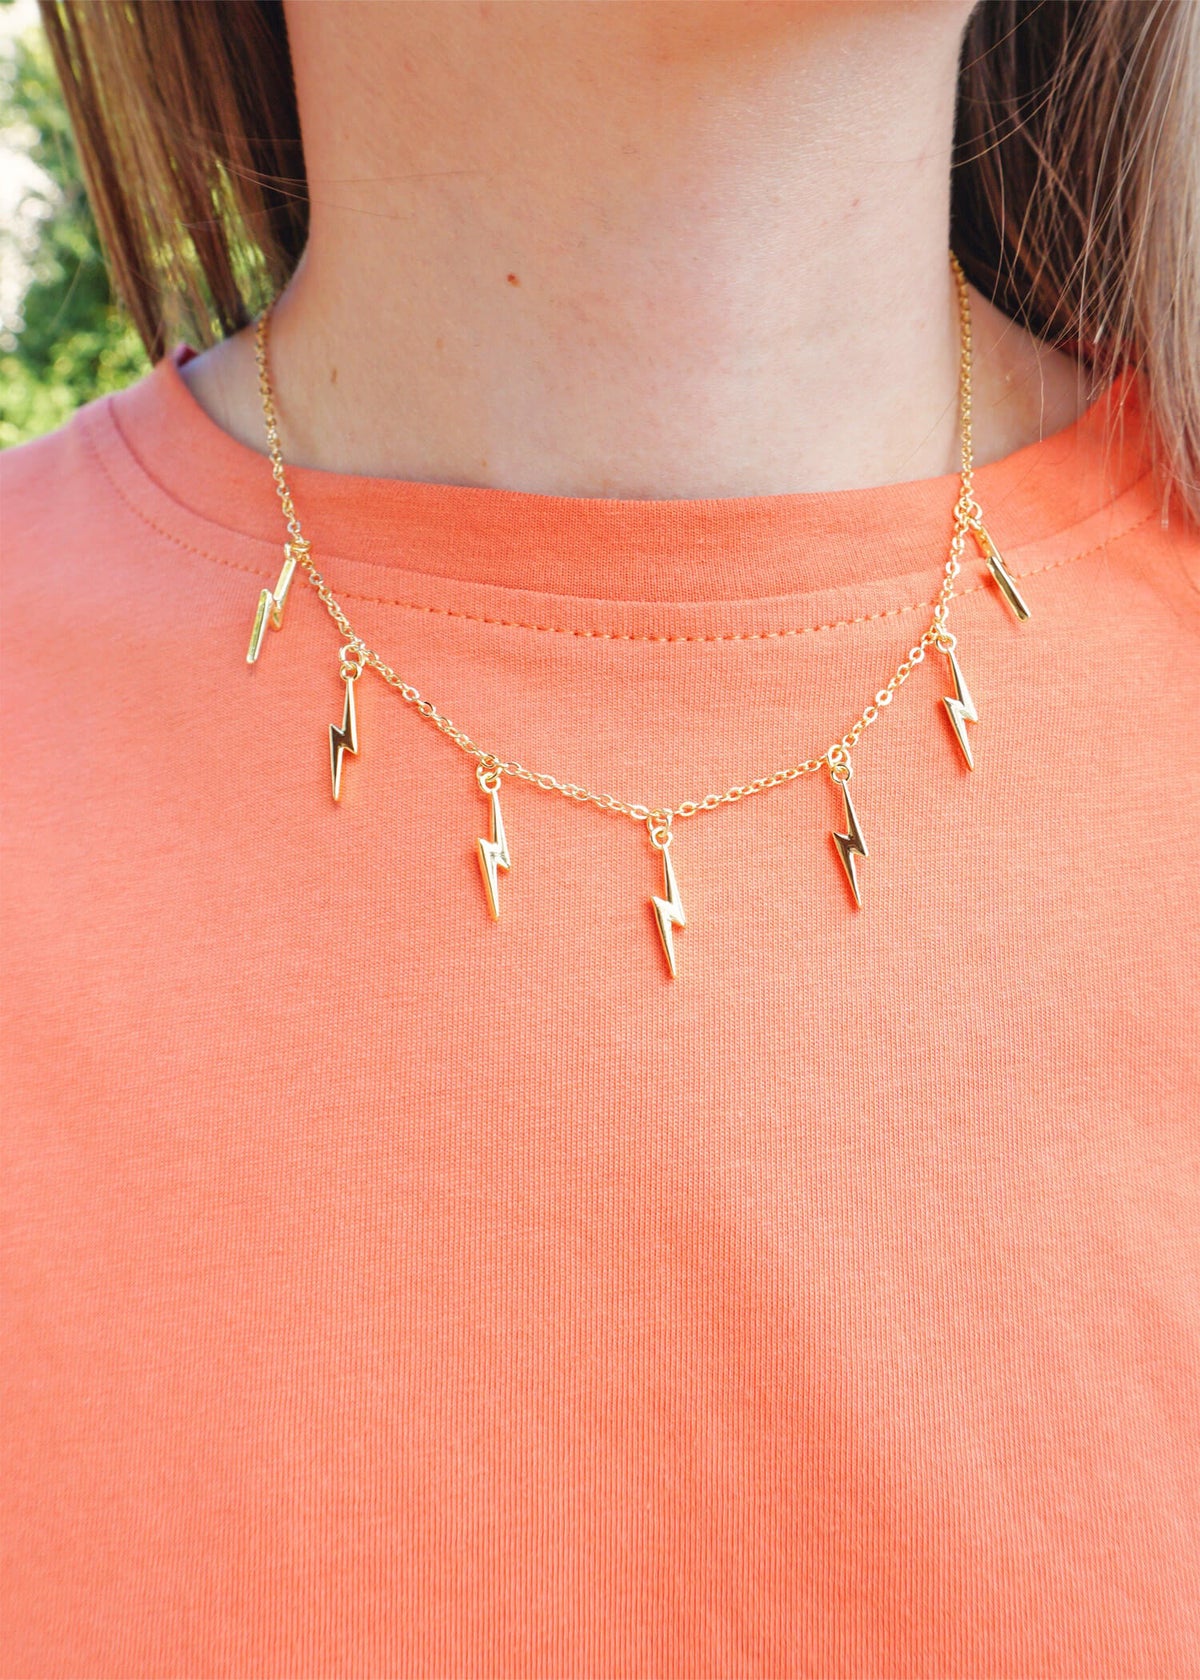 Struck By You Necklace - Gold Necklace MerciGrace Boutique.